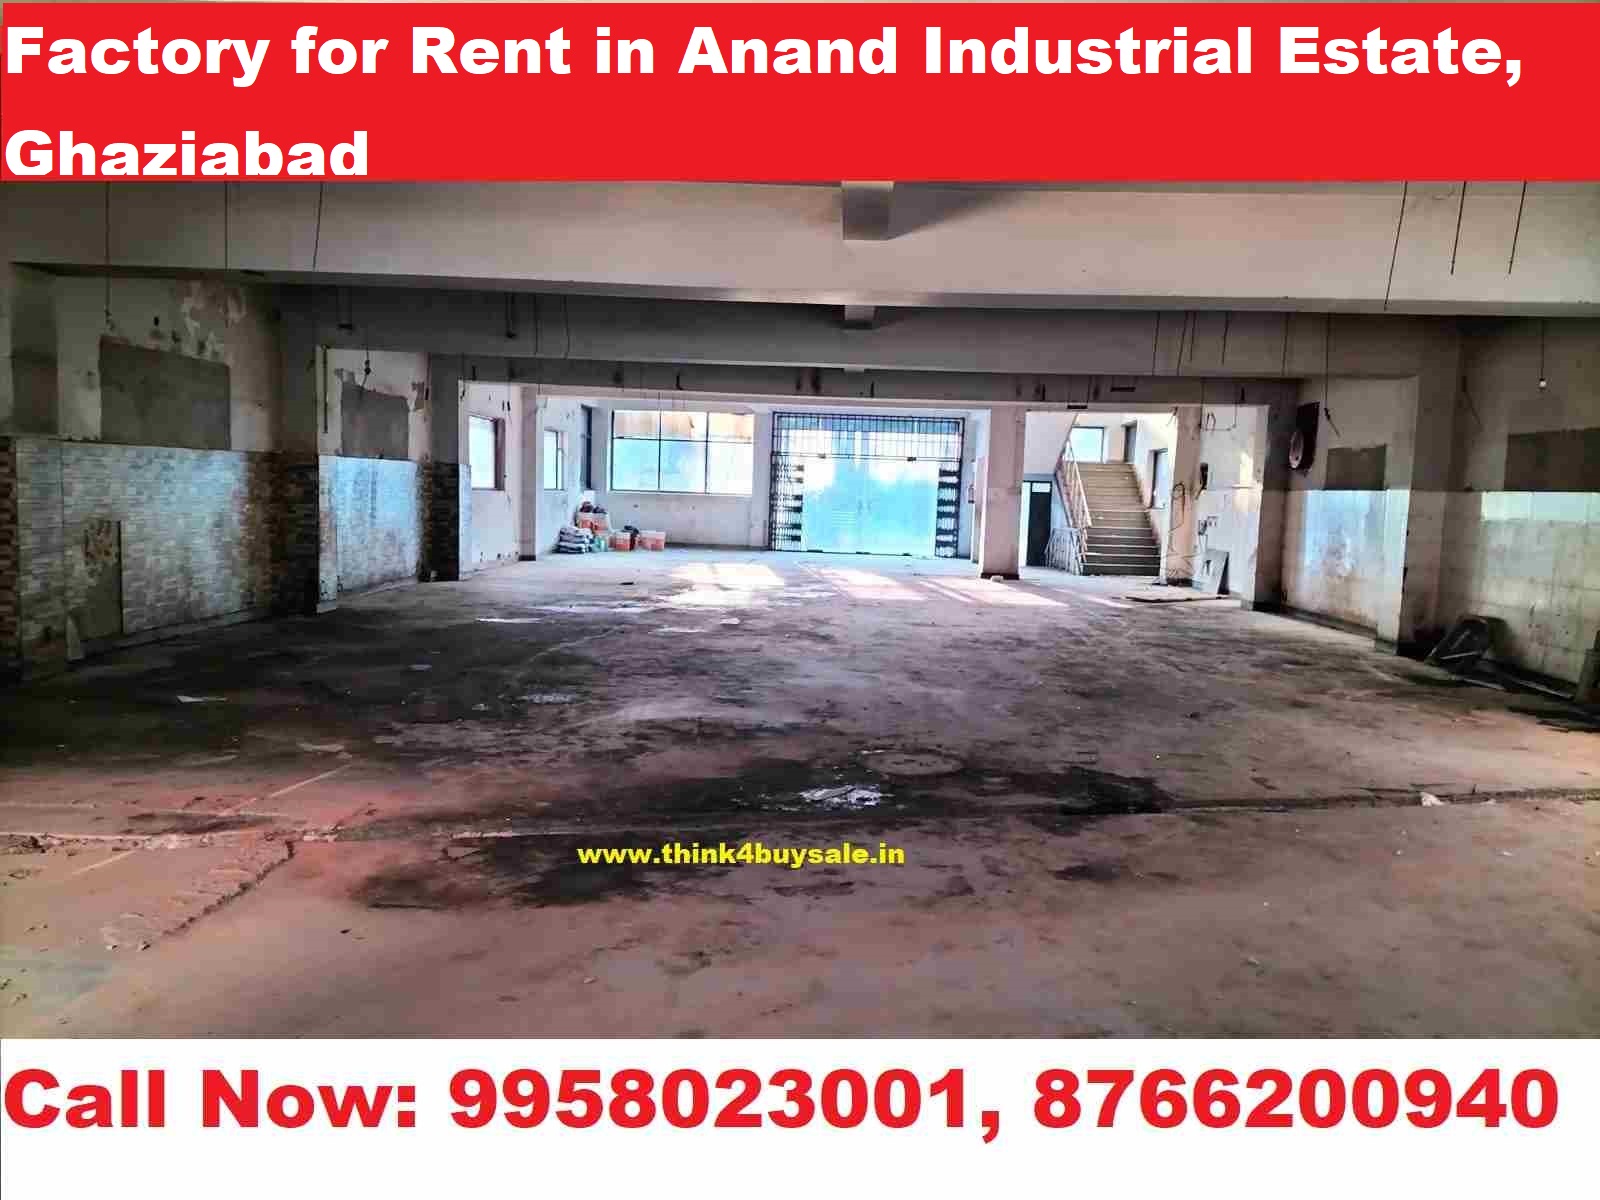 Factory for Rent in Anand Industrial Estate, Ghaziabad